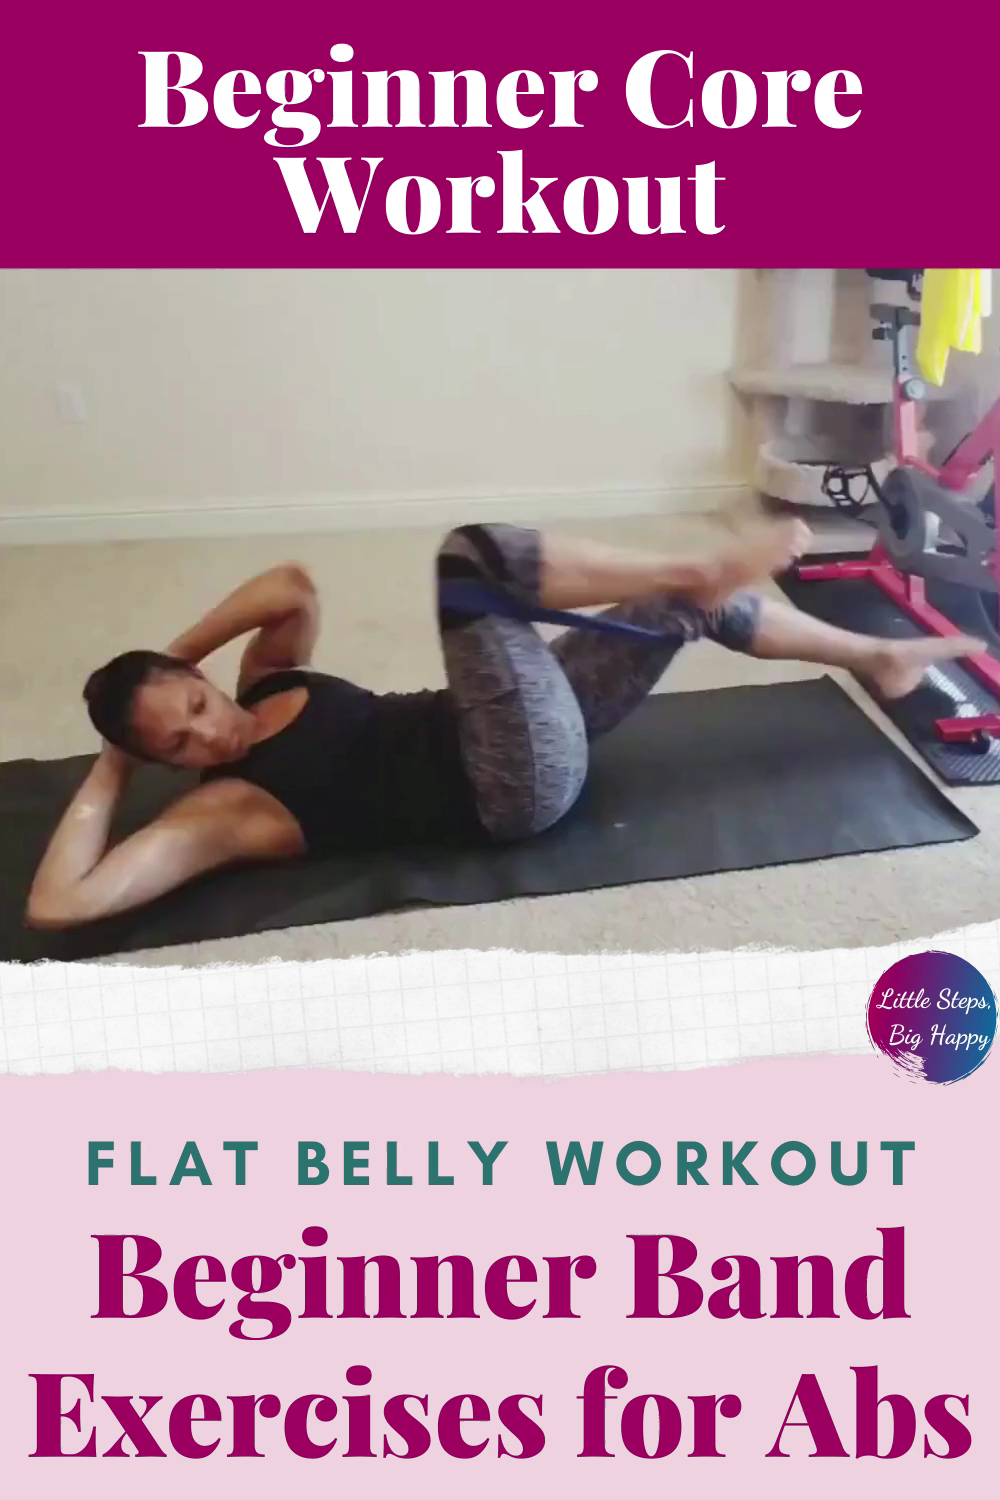 Beginner Resistance Band Exercises for Abs -   17 workouts for flat stomach aesthetic ideas